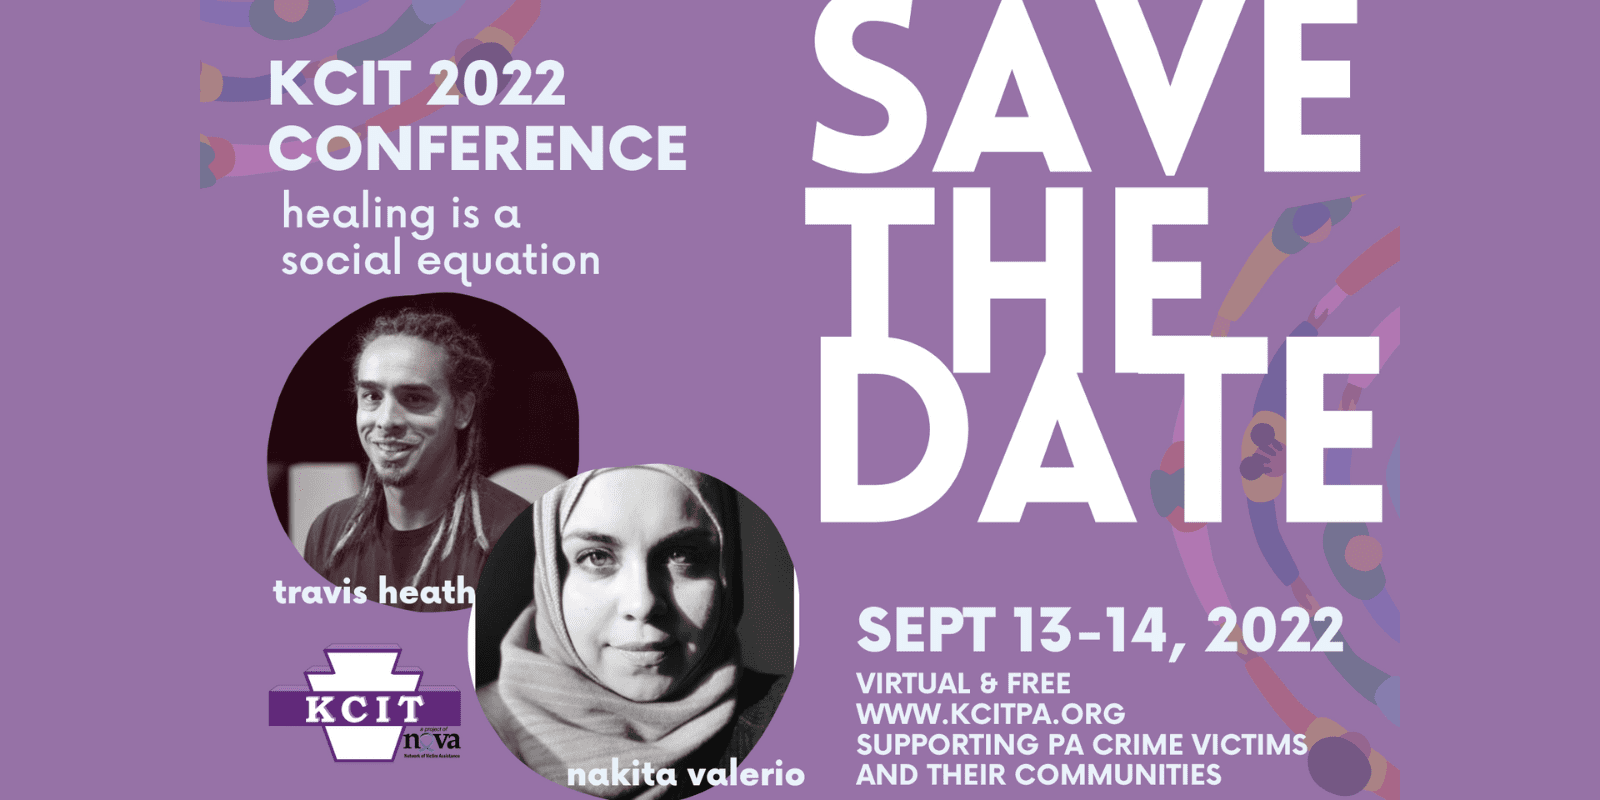 KCIT 2022 Conference: Healing is a Social Equation. Save the Date Sept 13-14, 2022. Virtual & Free.